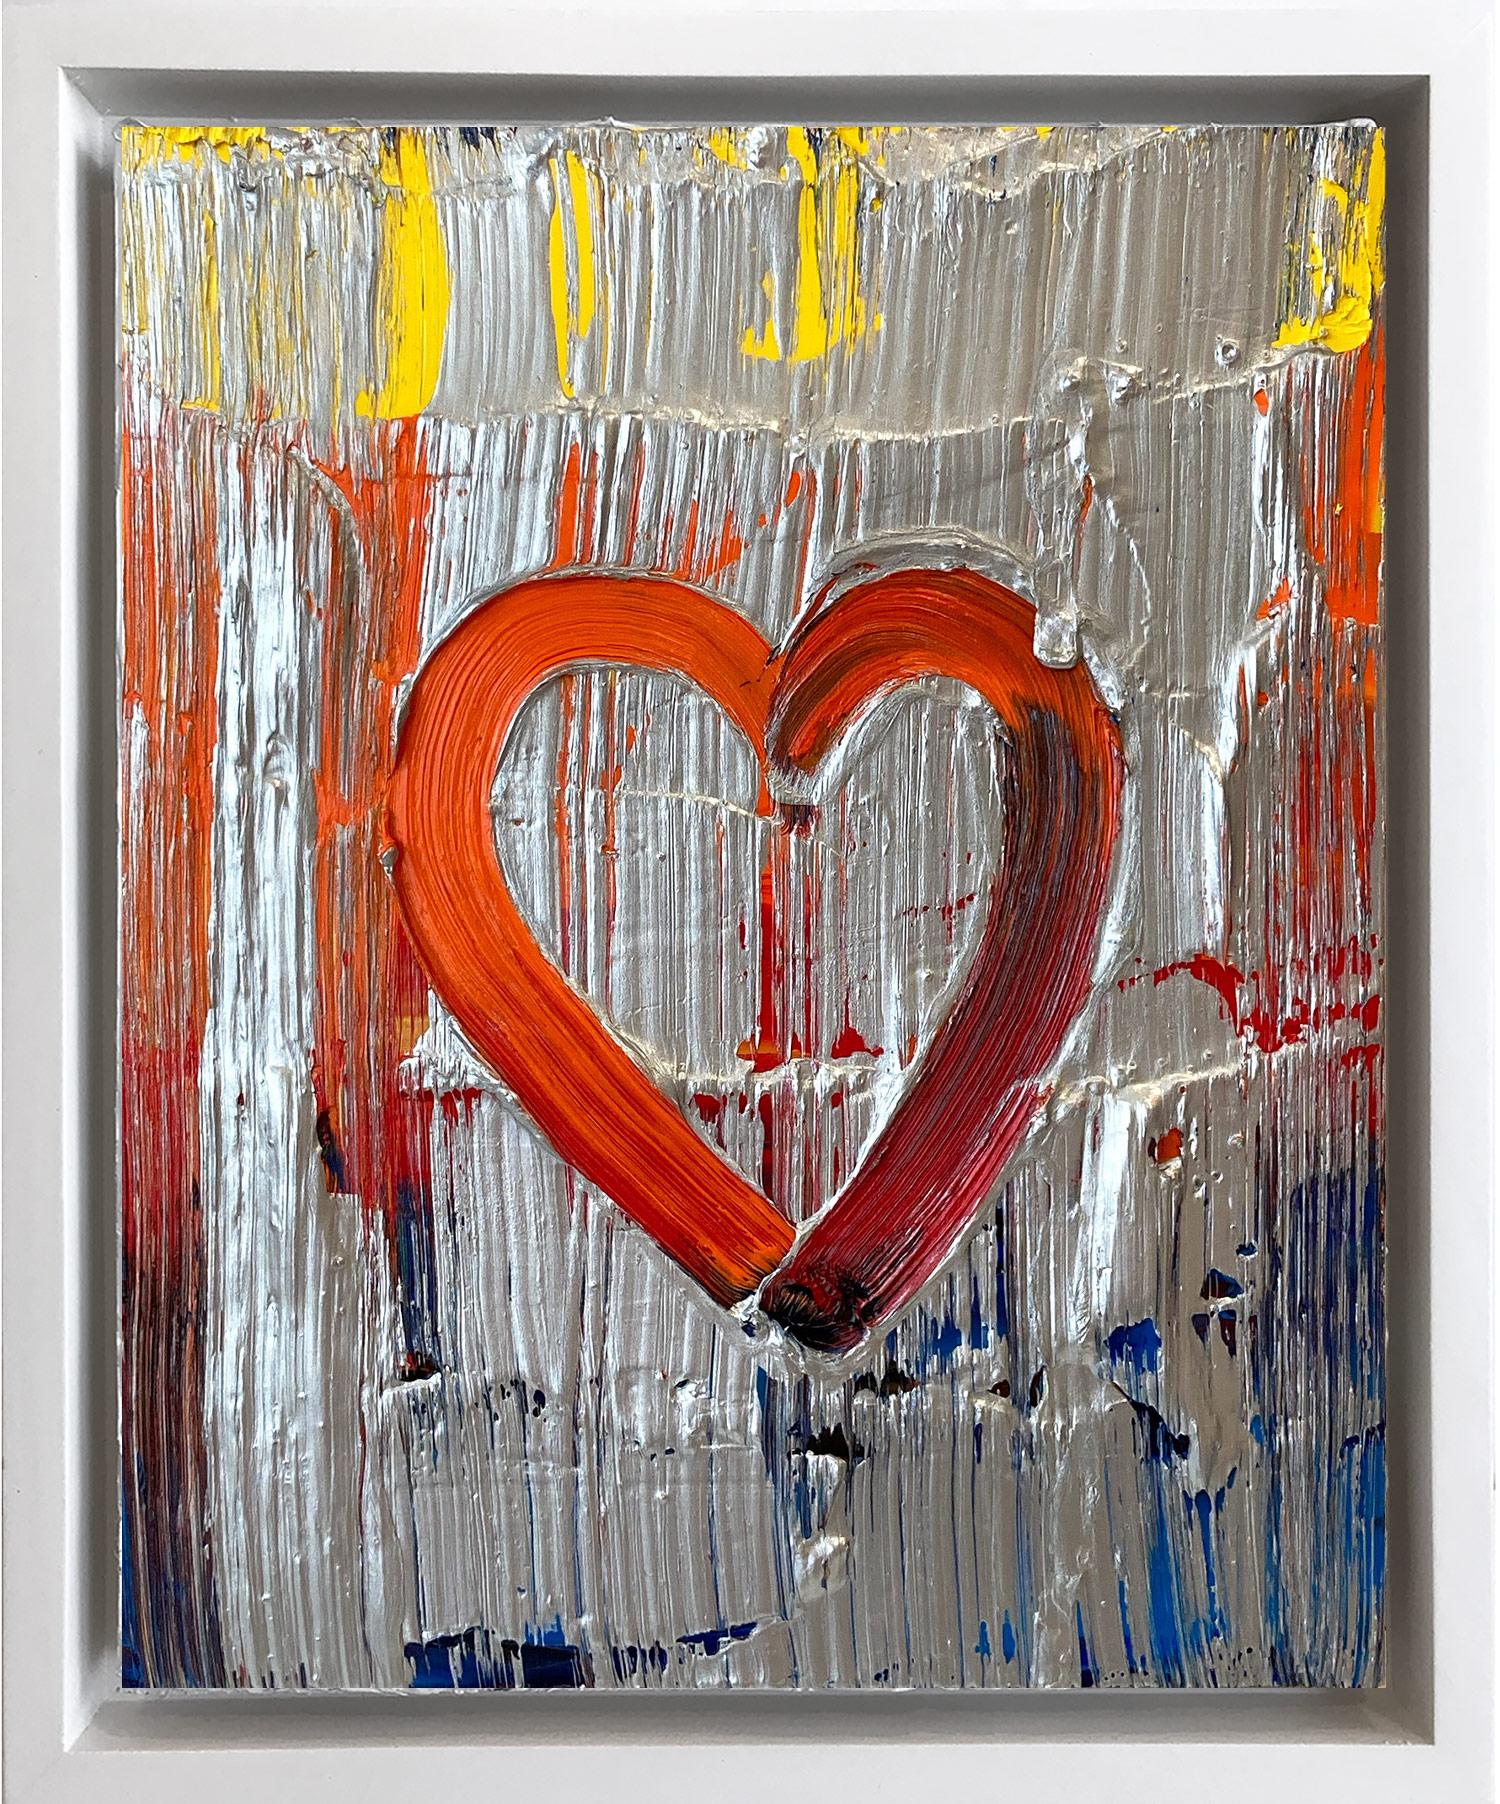 Cindy Shaoul Abstract Painting - "My Knight and Shinning Heart" Contemporary Oil Painting Framed w Floater Frame